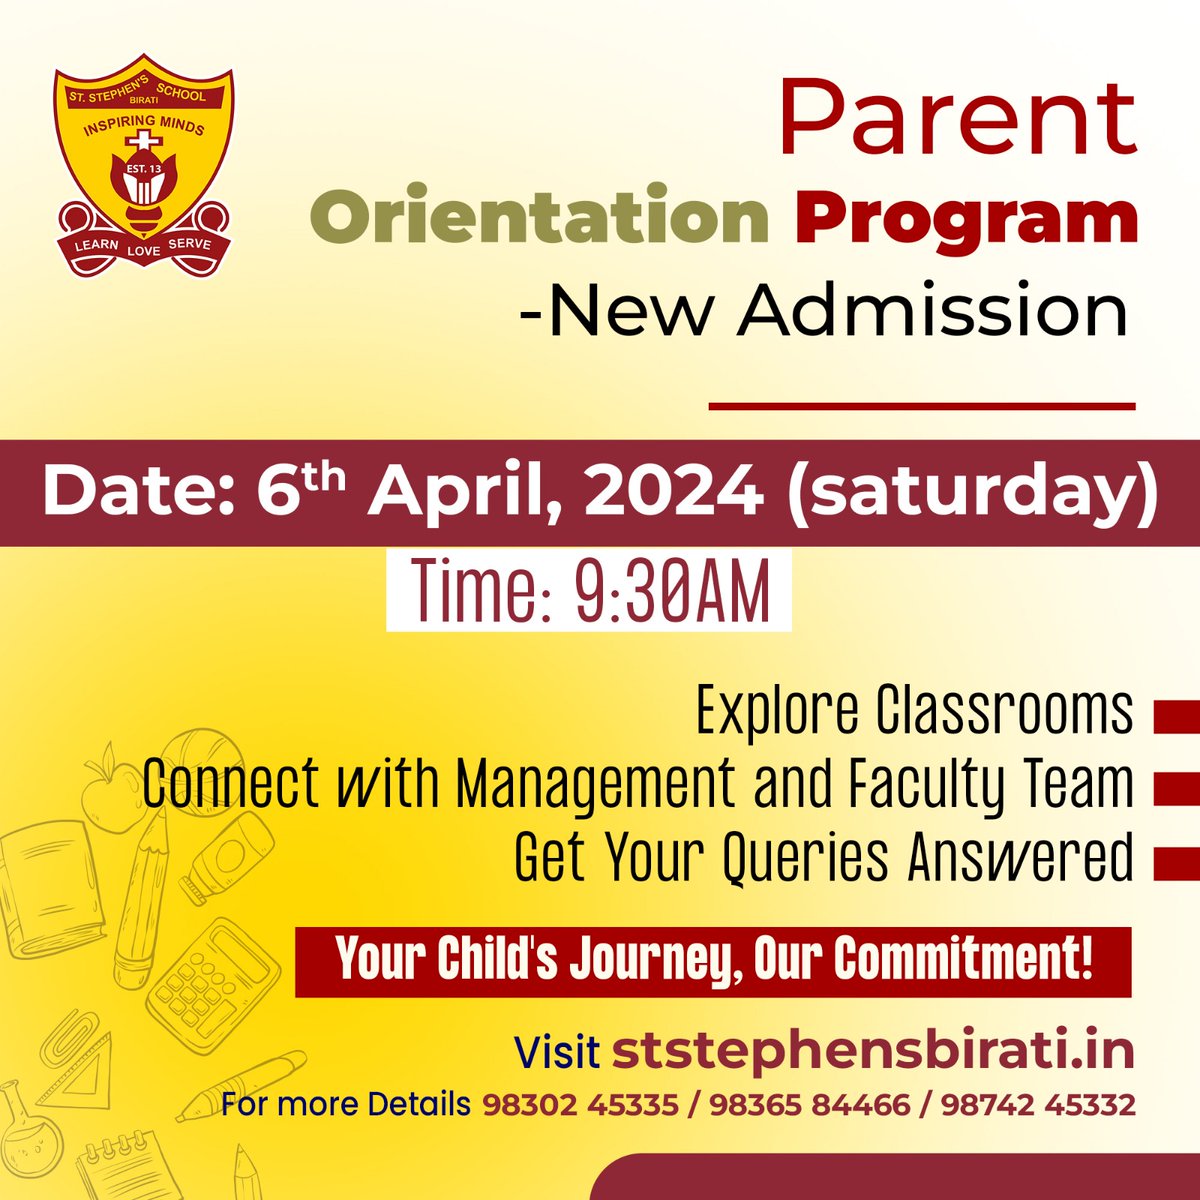 Join Us for the Parent Orientation Program for New Admissions to be held on 6th April 2024. Discover Our Academic Excellence and Nurturing Environment! 🌐 ststephensbirati.in #StStephensSchoolBirati #StStephensSchool #ICSESchool #digitalschool #parentorientationprogram